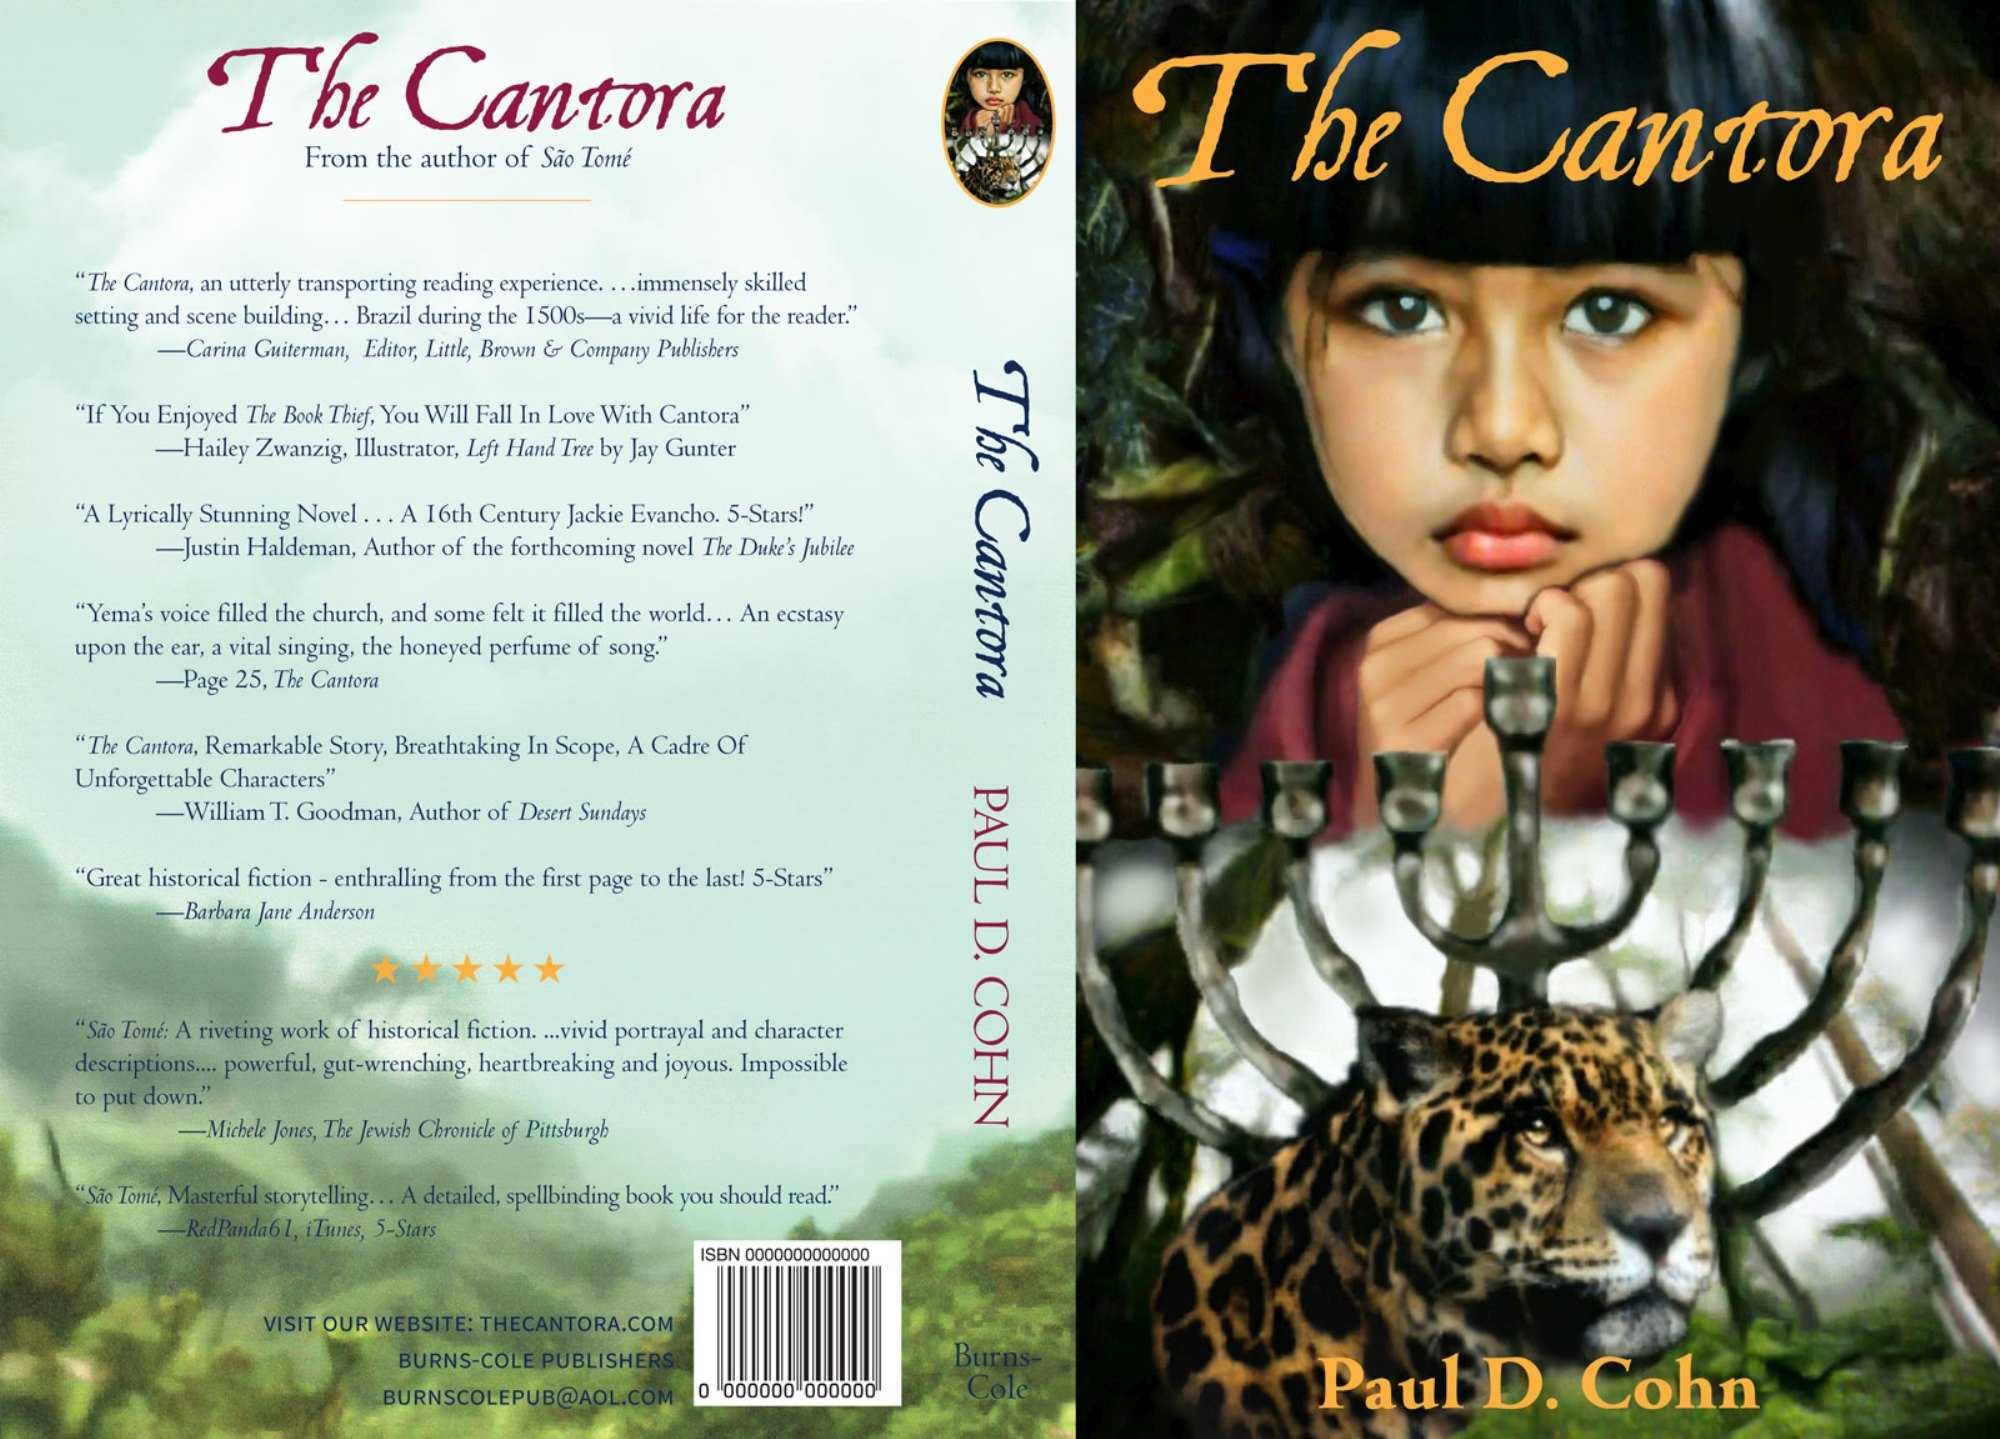 Front and back cover of "The Cantora" by Paulo Cohn